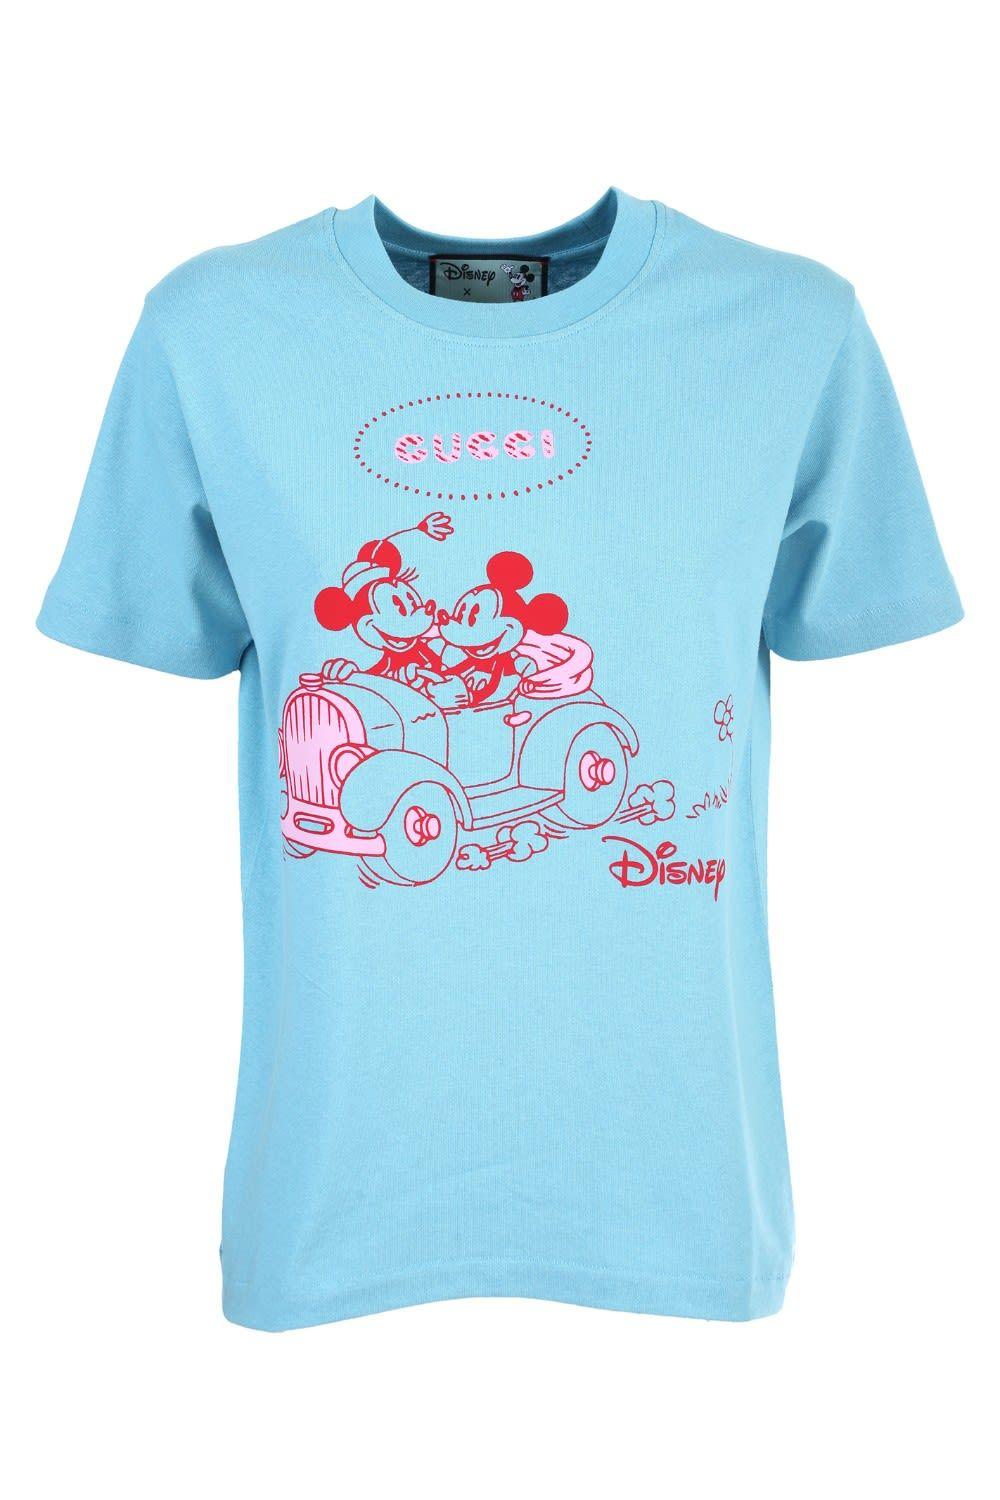 Gucci Mickey Mouse-print Cotton T-shirt in Light Blue (Blue) - Lyst